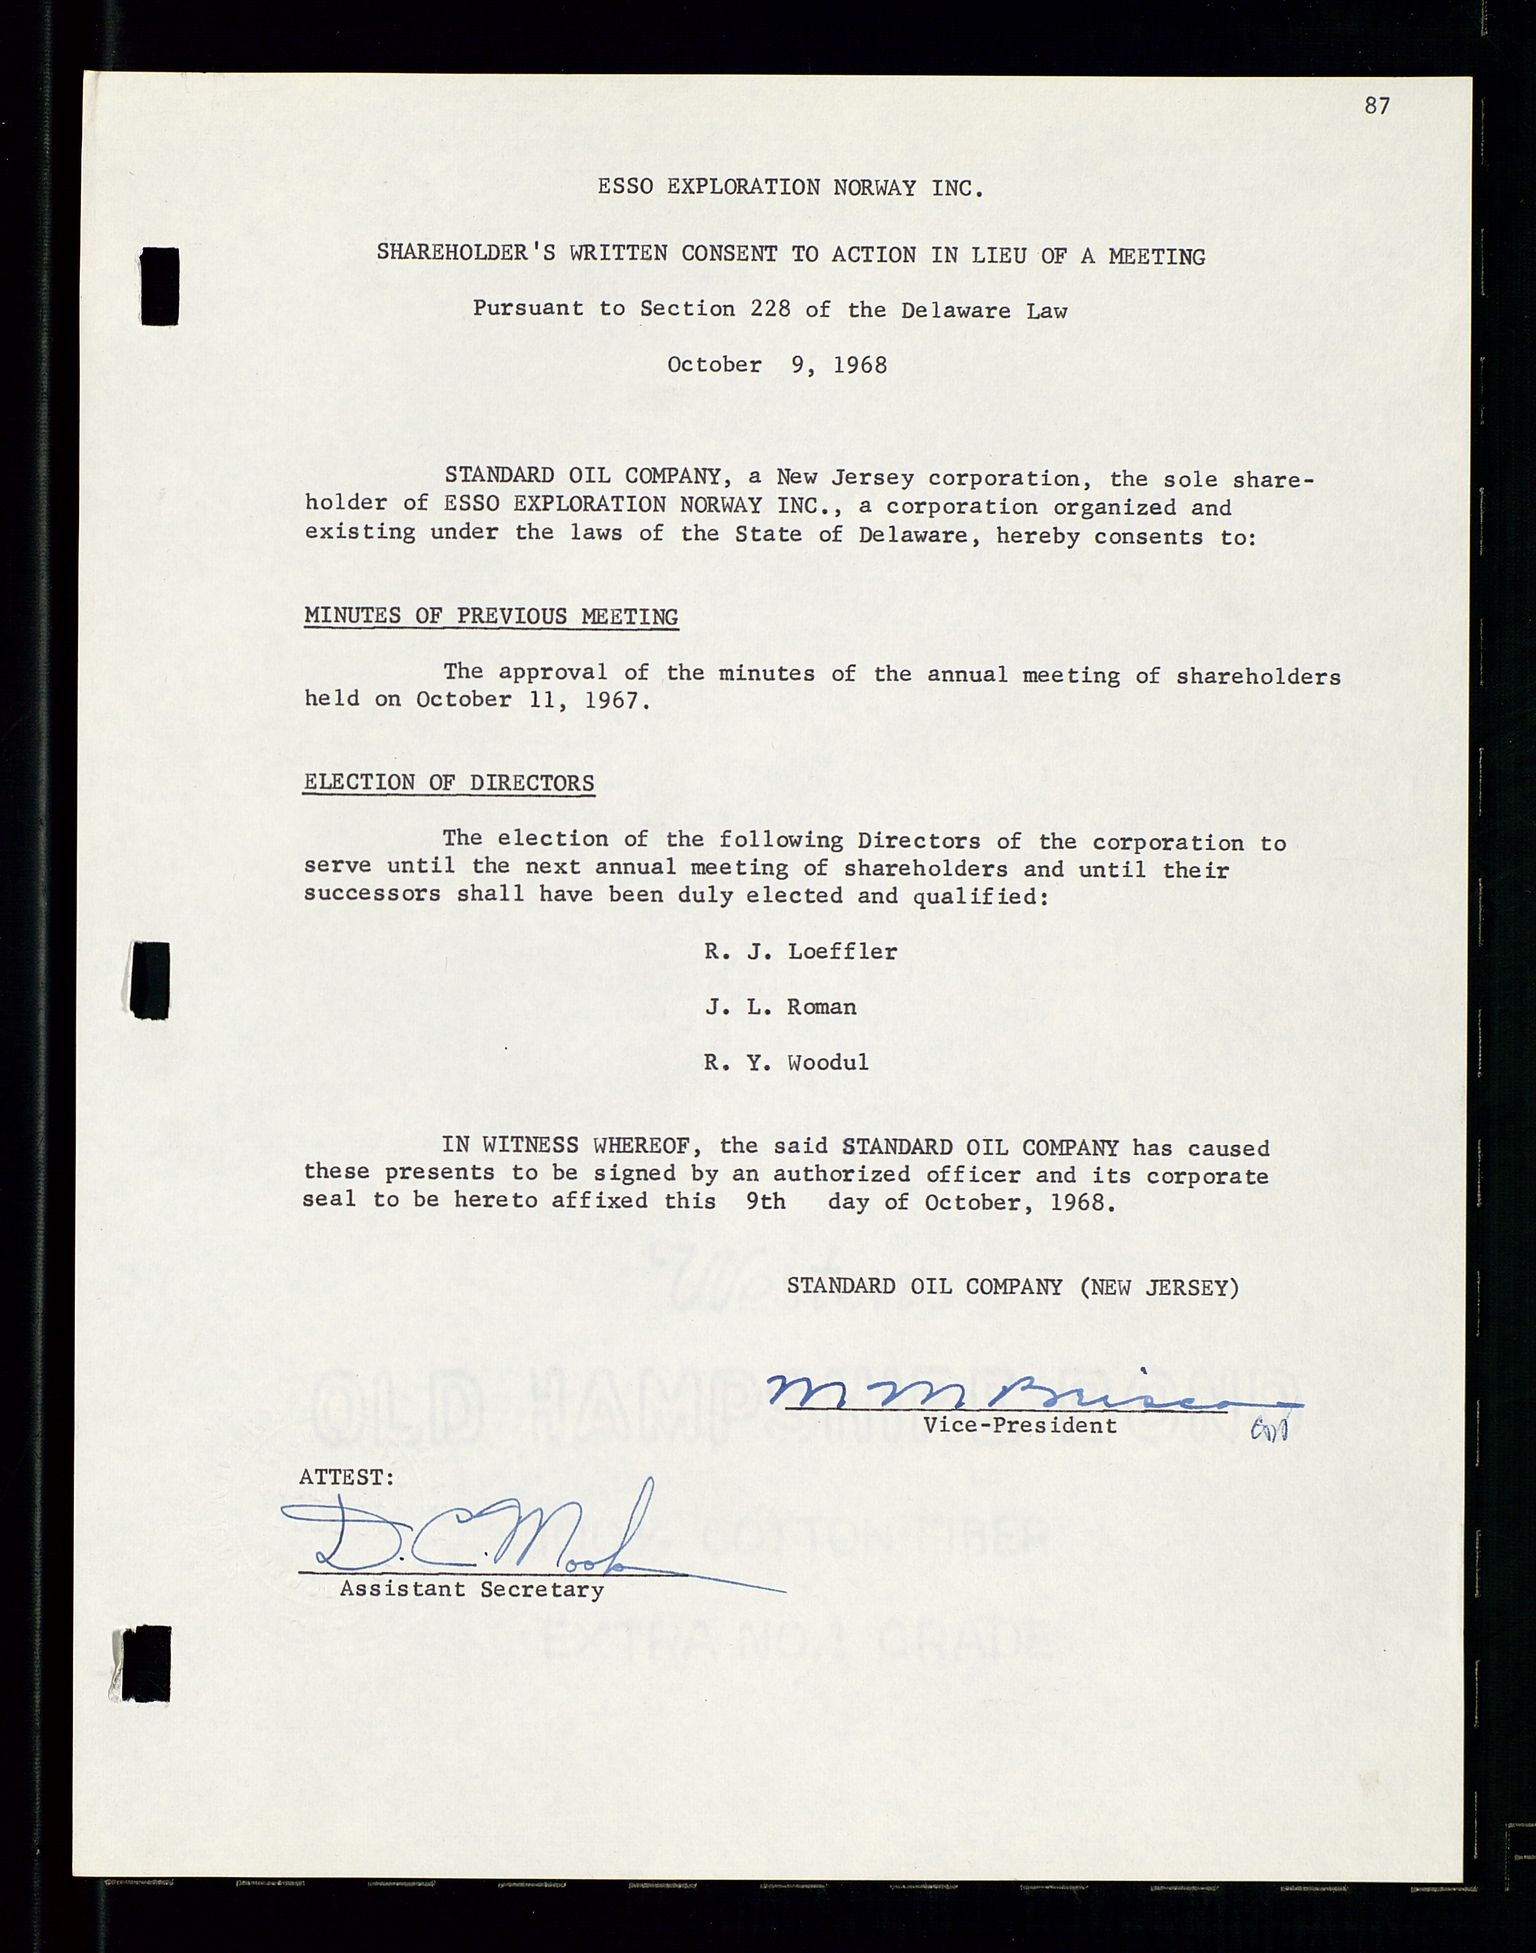 Pa 1512 - Esso Exploration and Production Norway Inc., SAST/A-101917/A/Aa/L0001/0001: Styredokumenter / Corporate records, By-Laws, Board meeting minutes, Incorporations, 1965-1975, s. 87